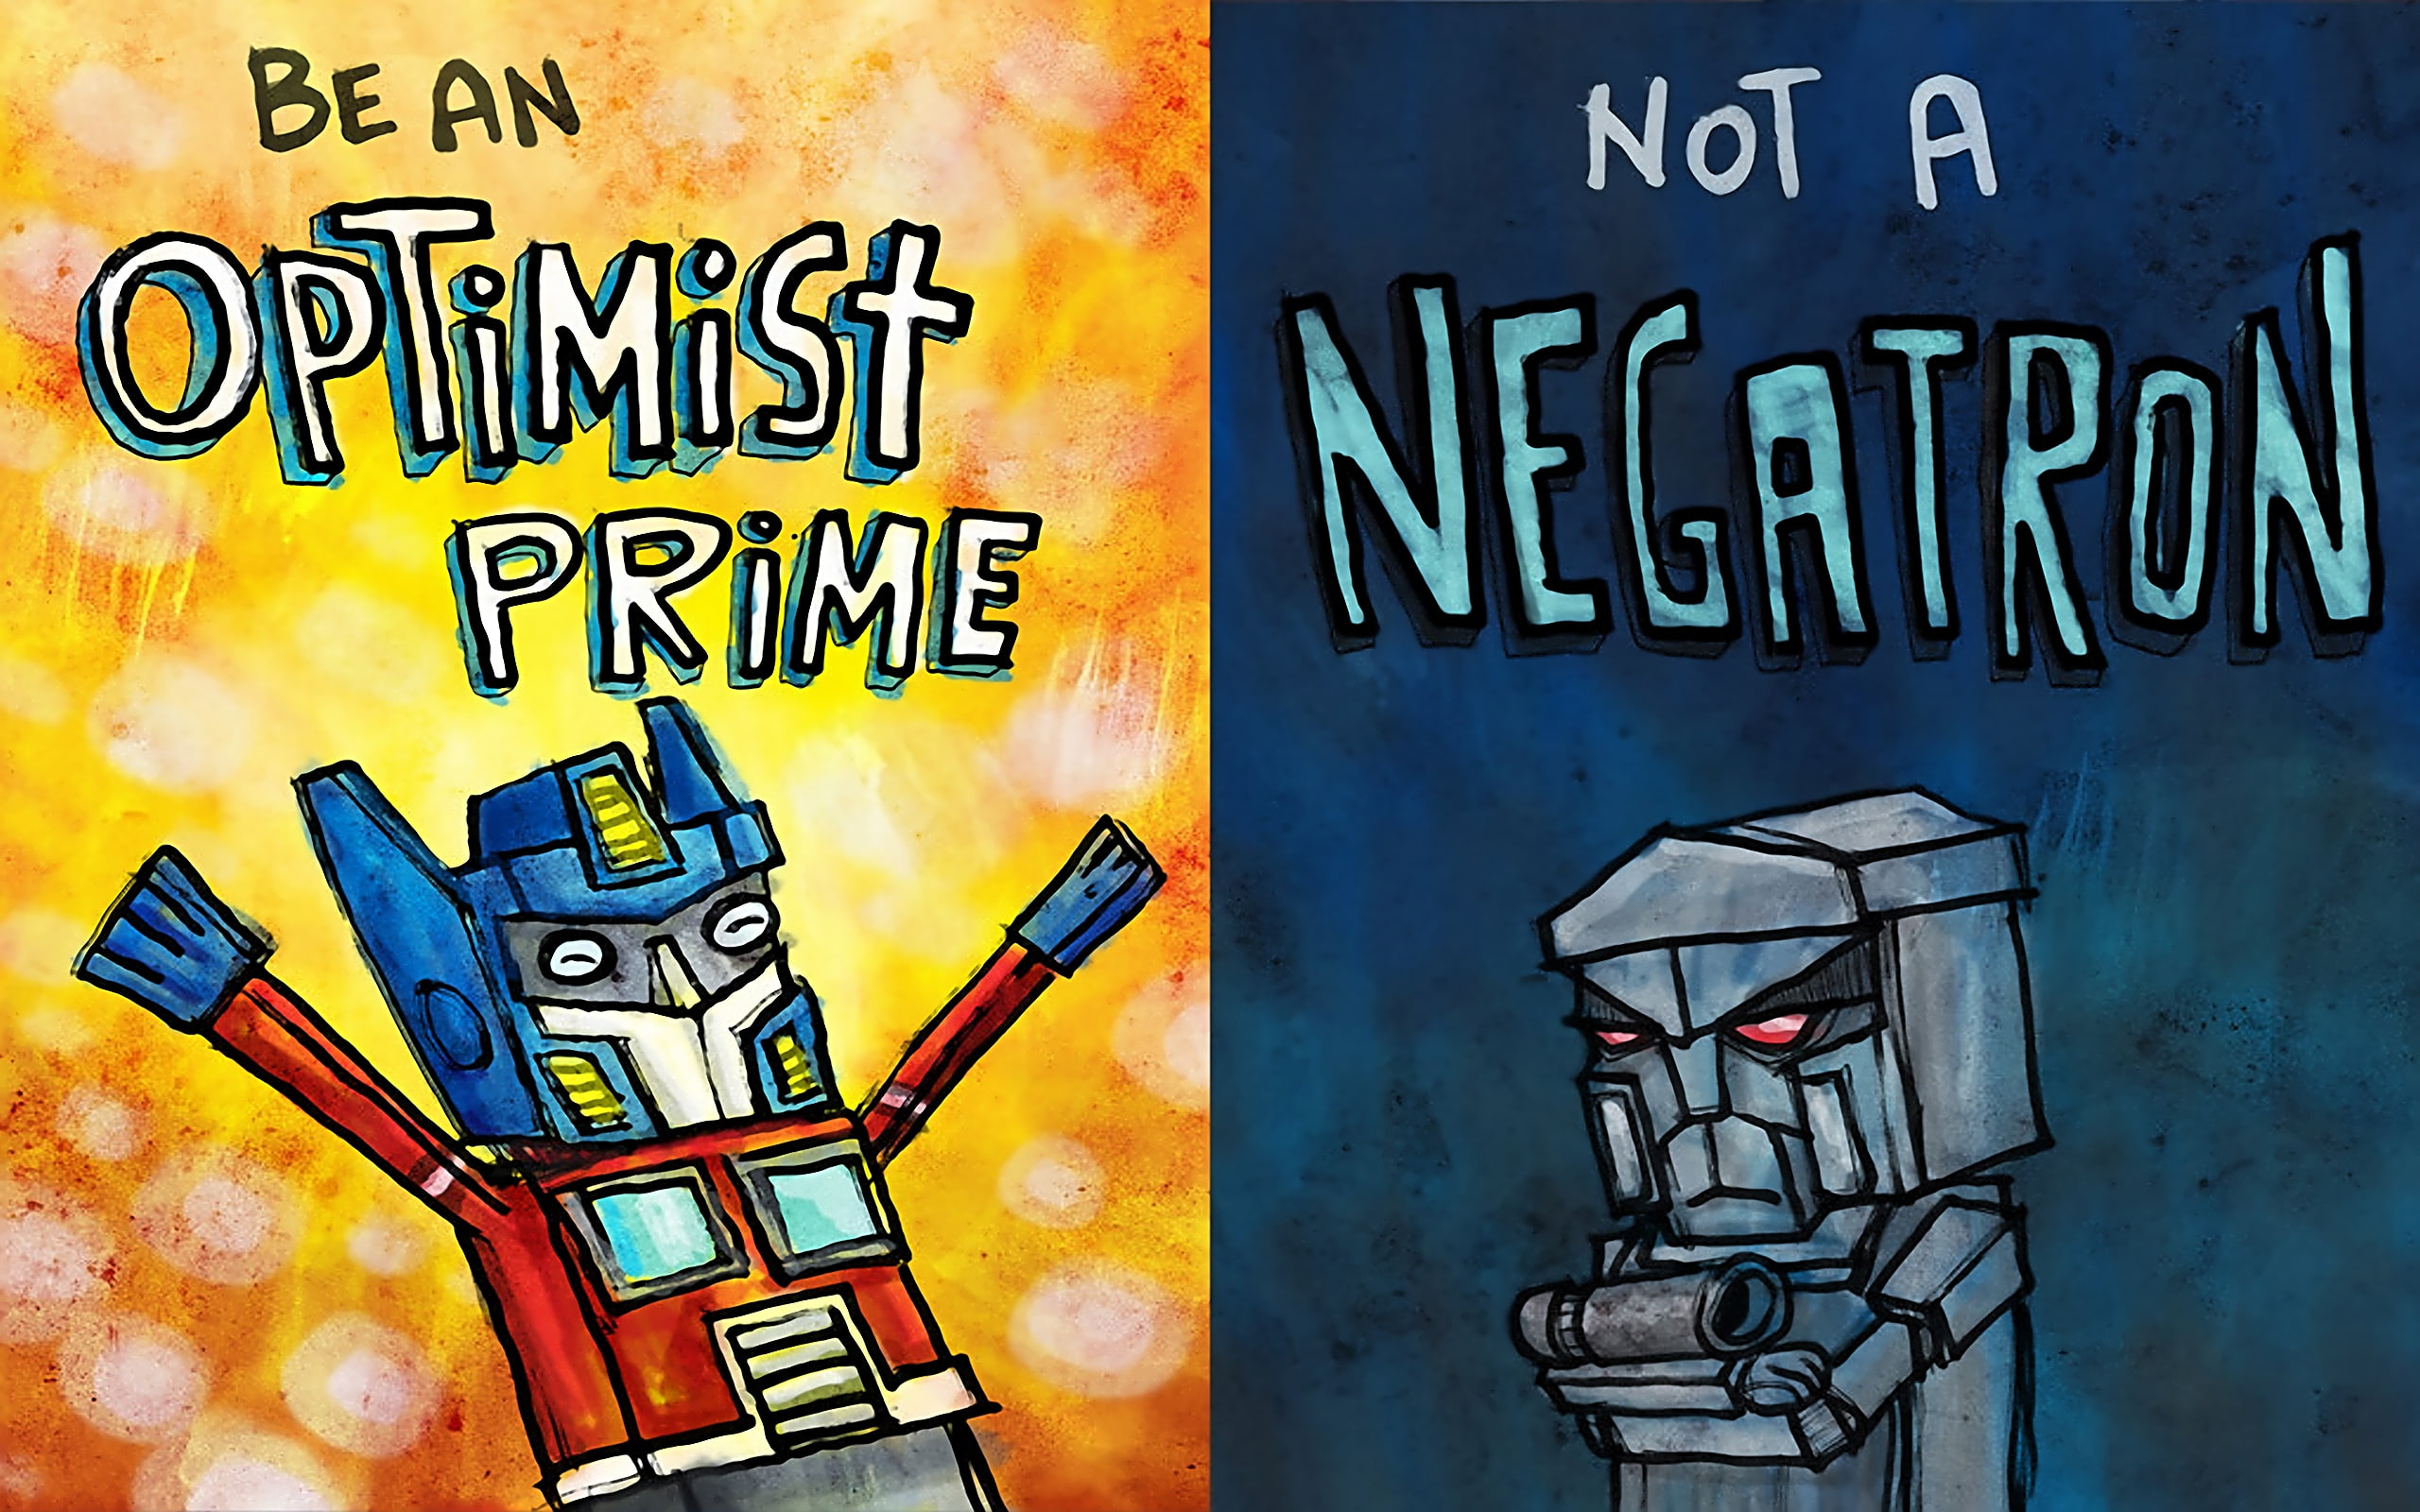 Optimist and Pessimistic, robots, funny, drawings